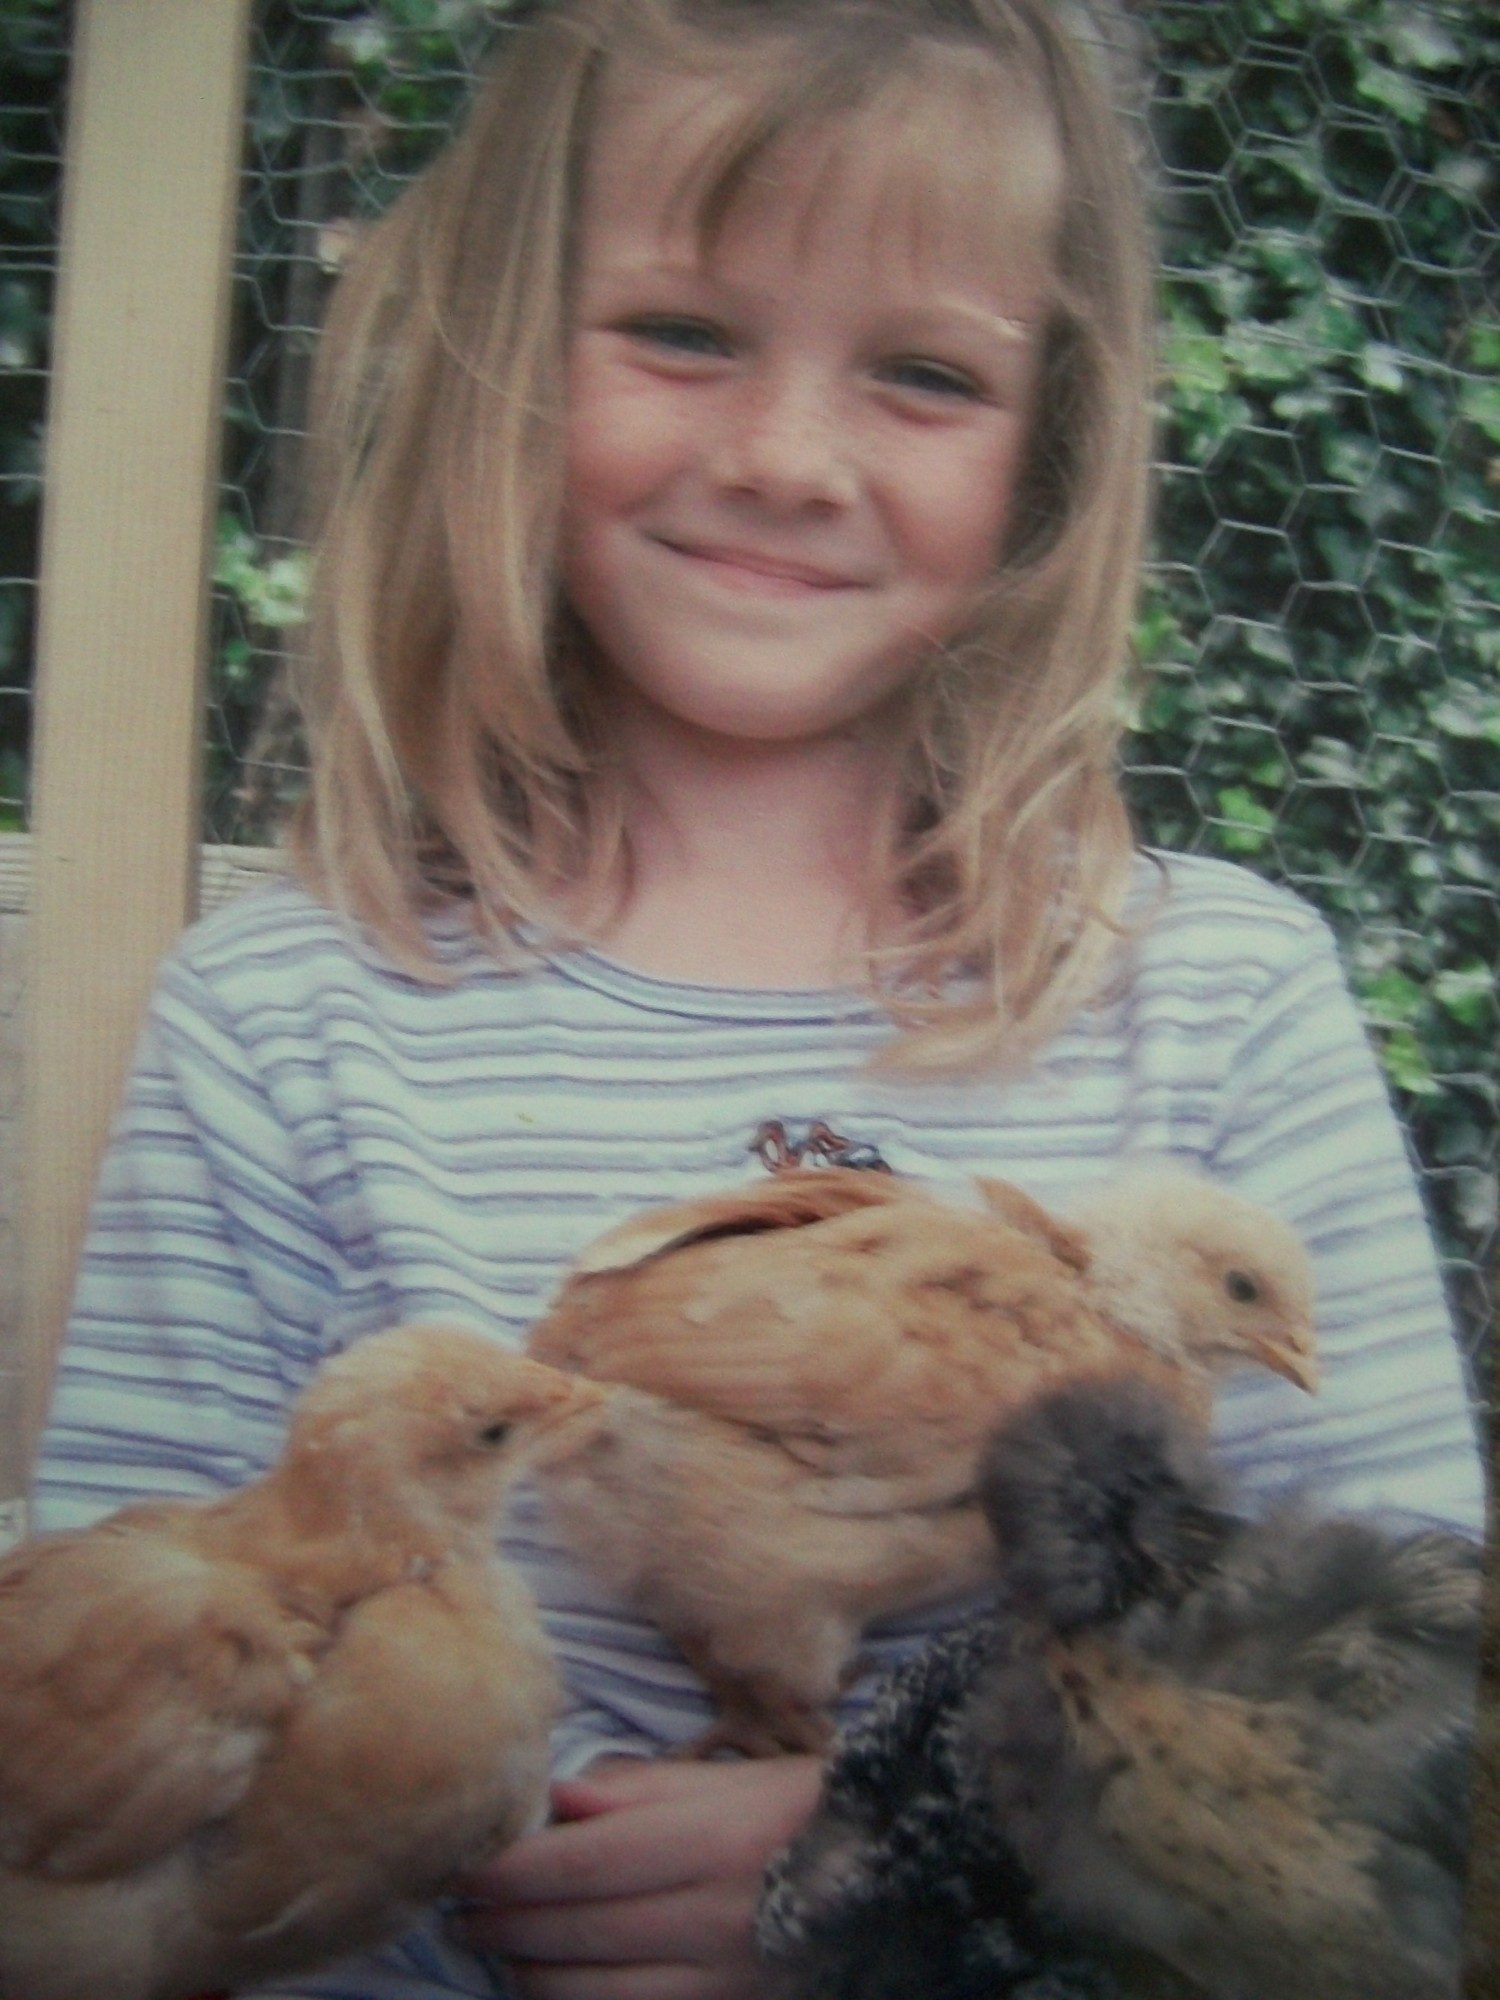 I've had chickens my entire life. (since I was 5 years old) and have always loved them!